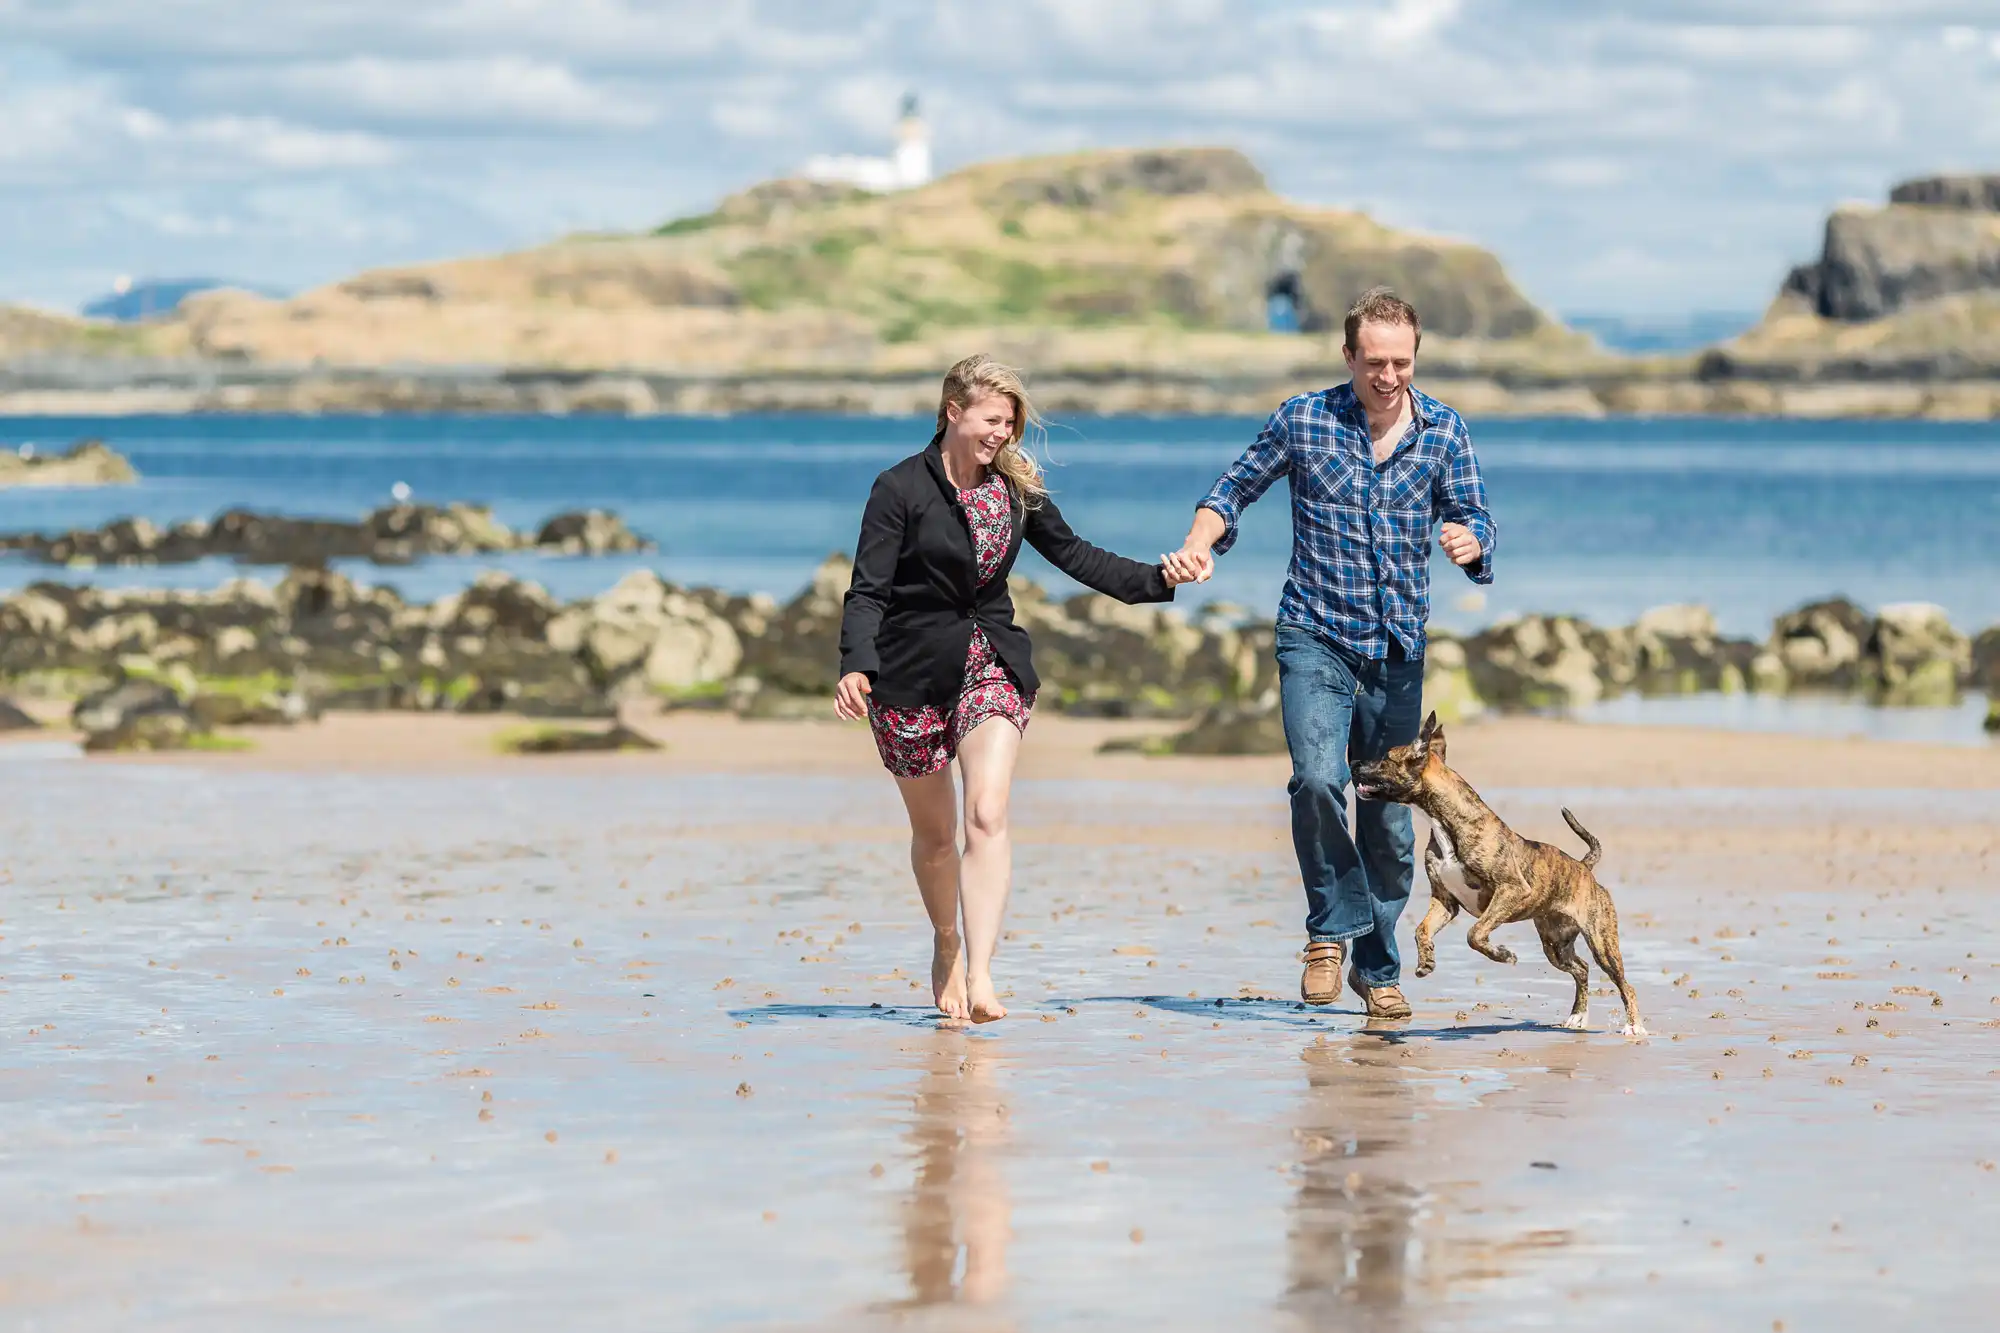 A couple walking with their dog on a sandy beach, holding hands and smiling, with a lighthouse and blue sky in the background.